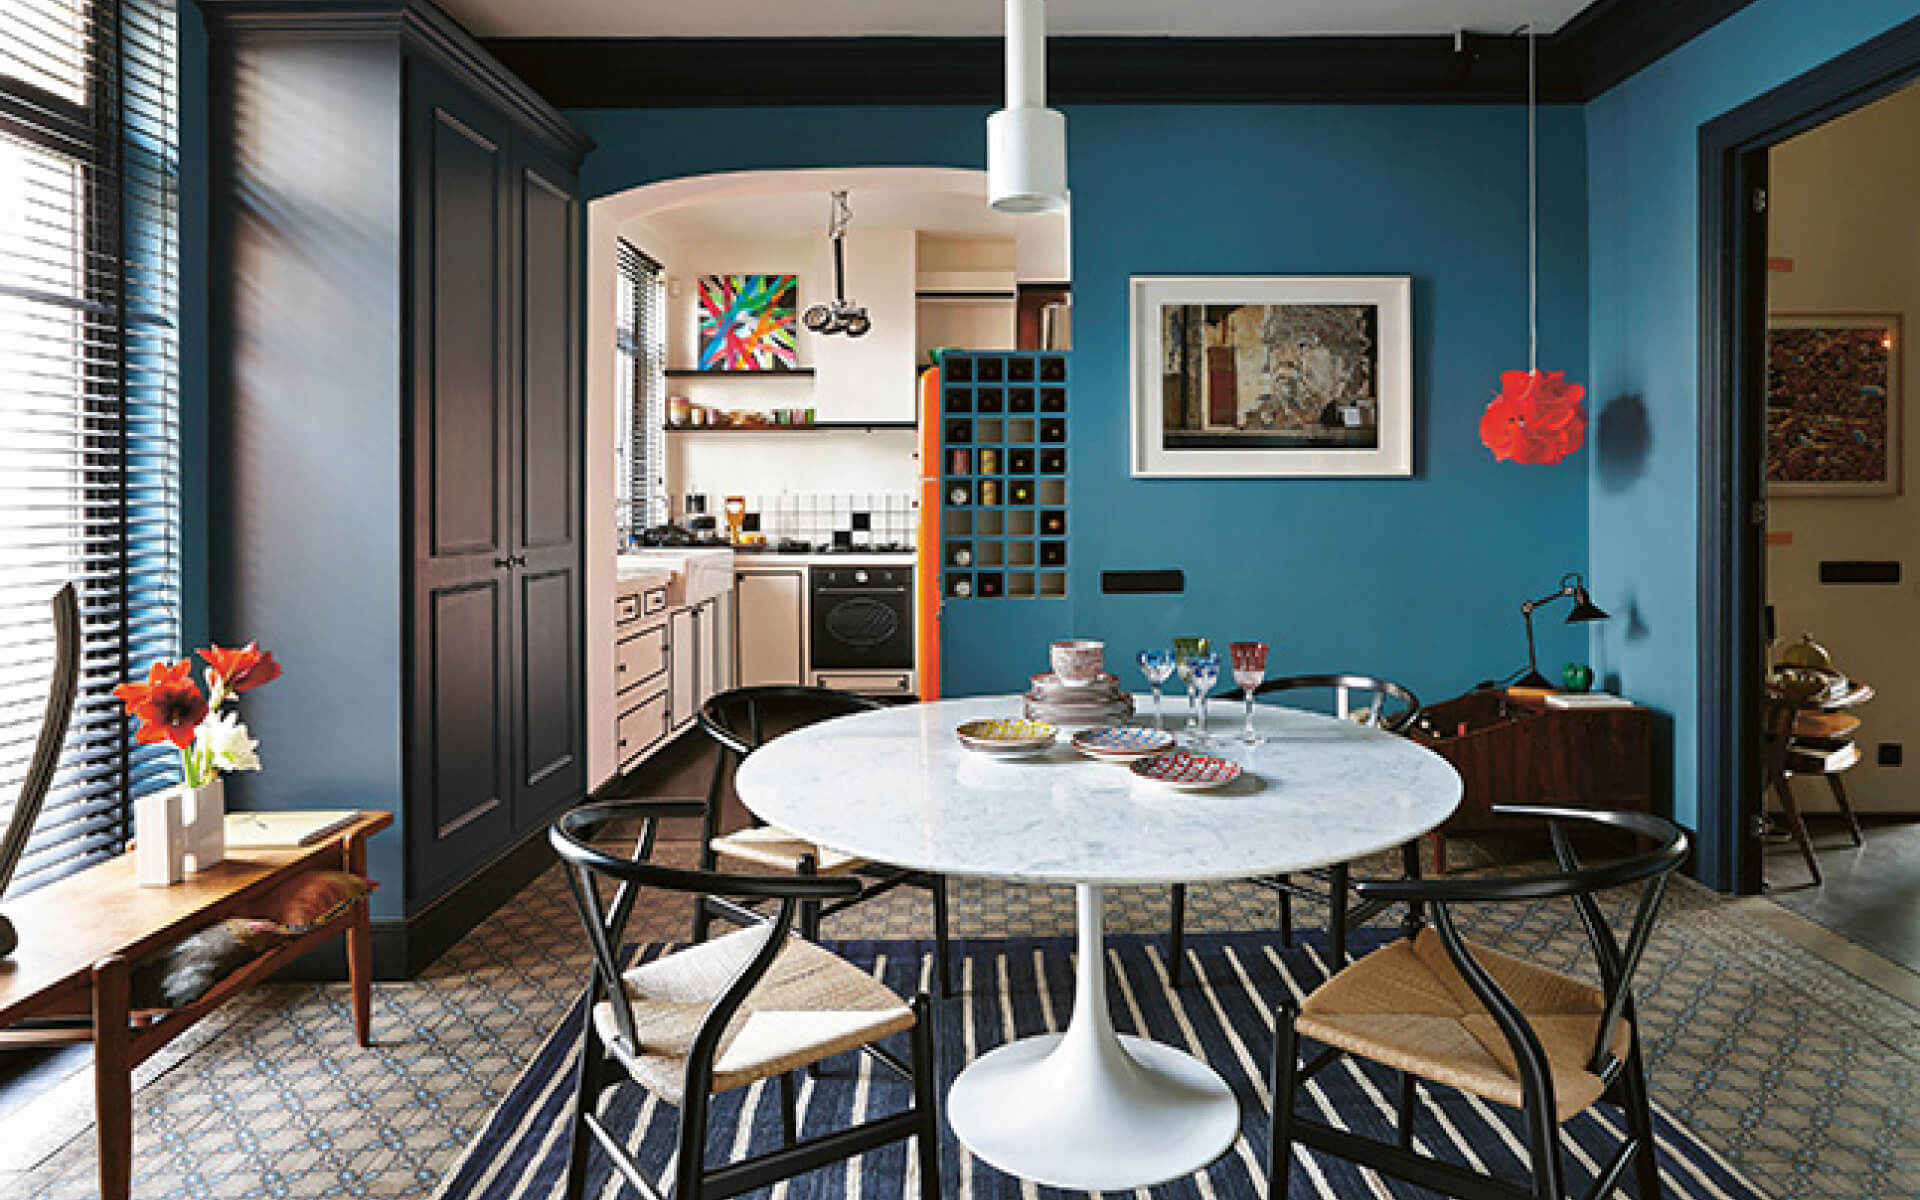 Electic style kitchen with fun designs and bold colors.